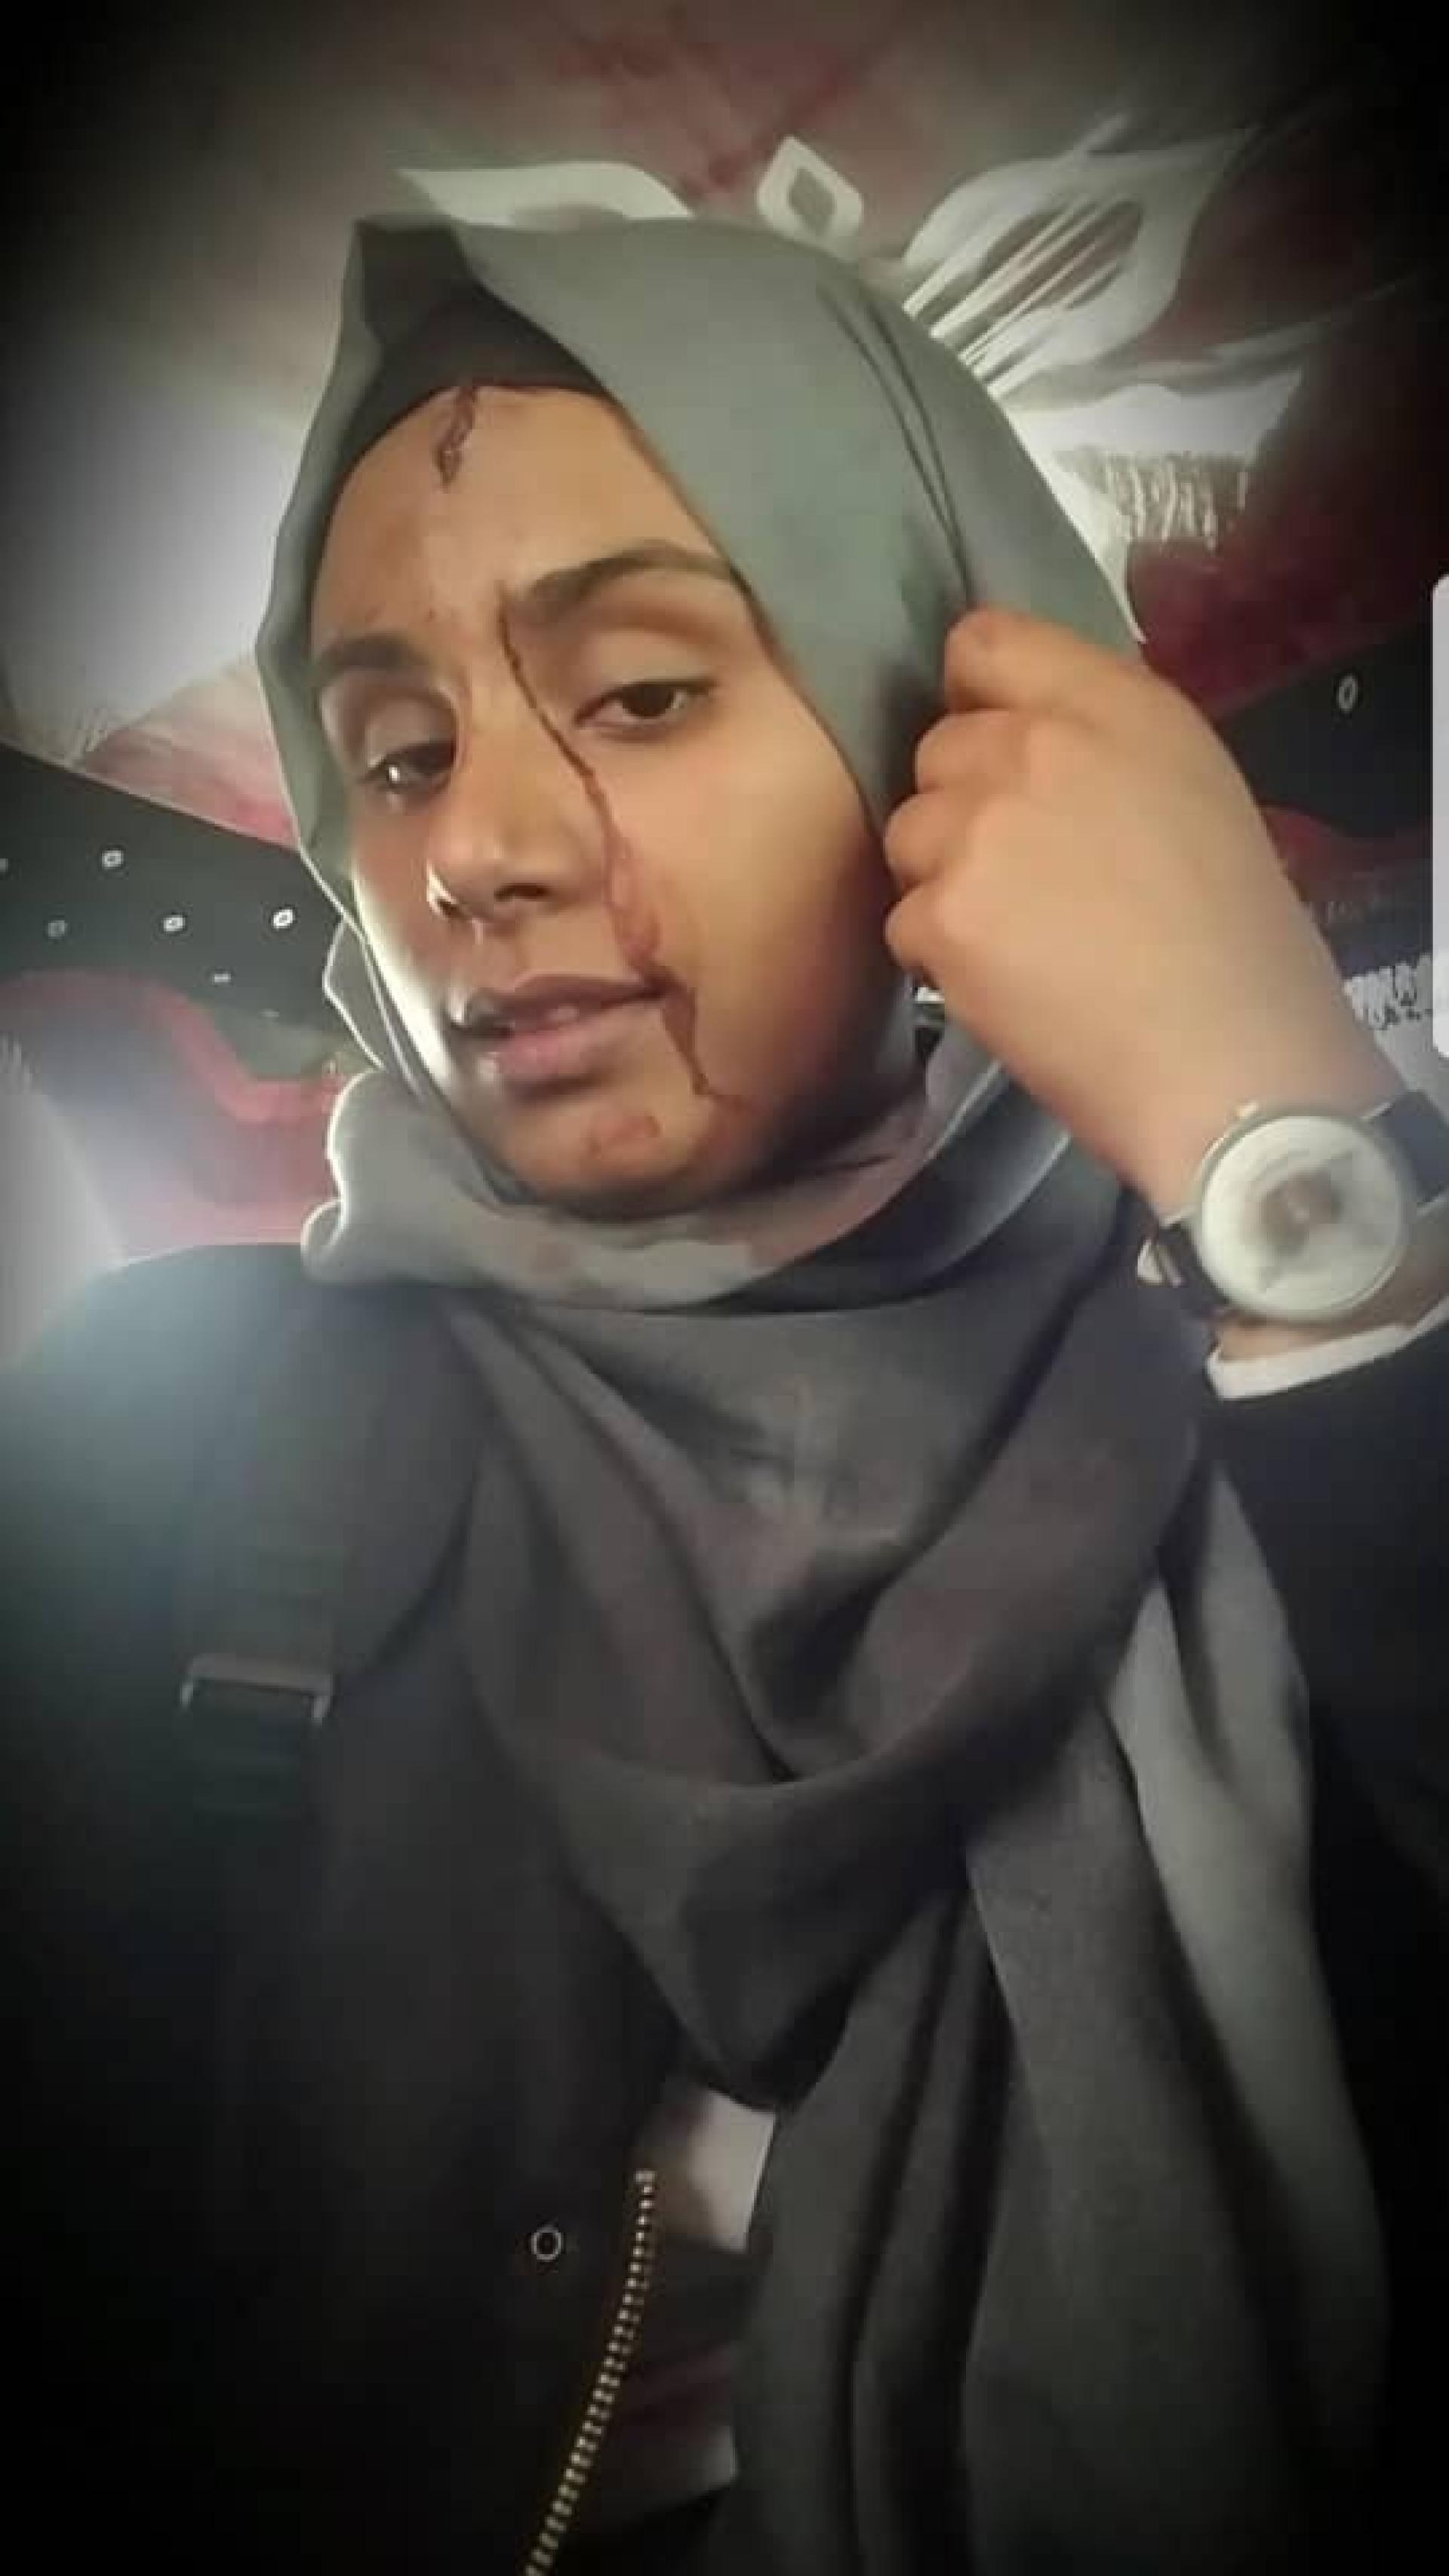 Selfie of woman wearing a gray hijab with bloody trickling down her face. 